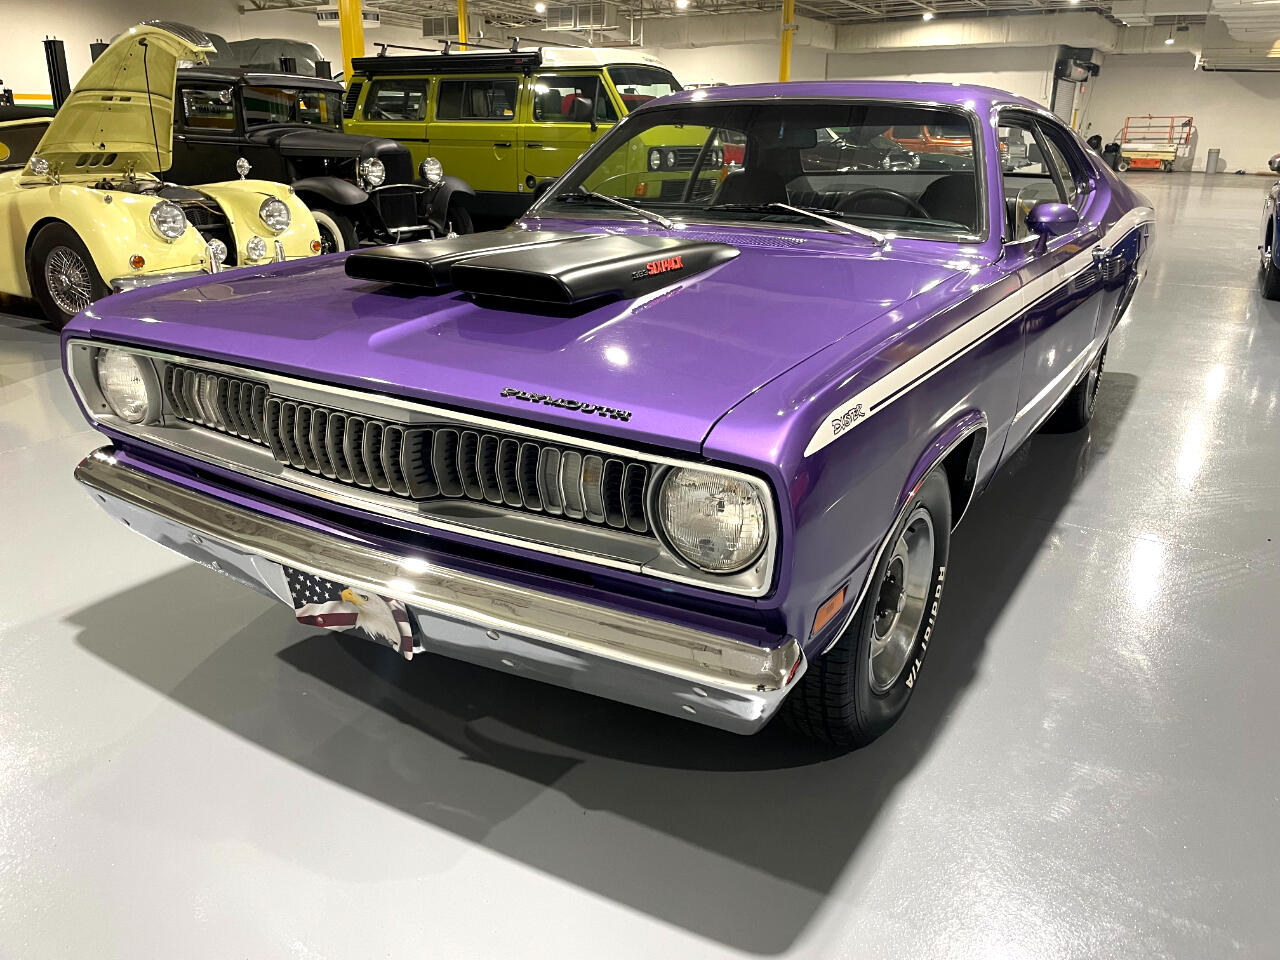 1971 Plymouth Duster 